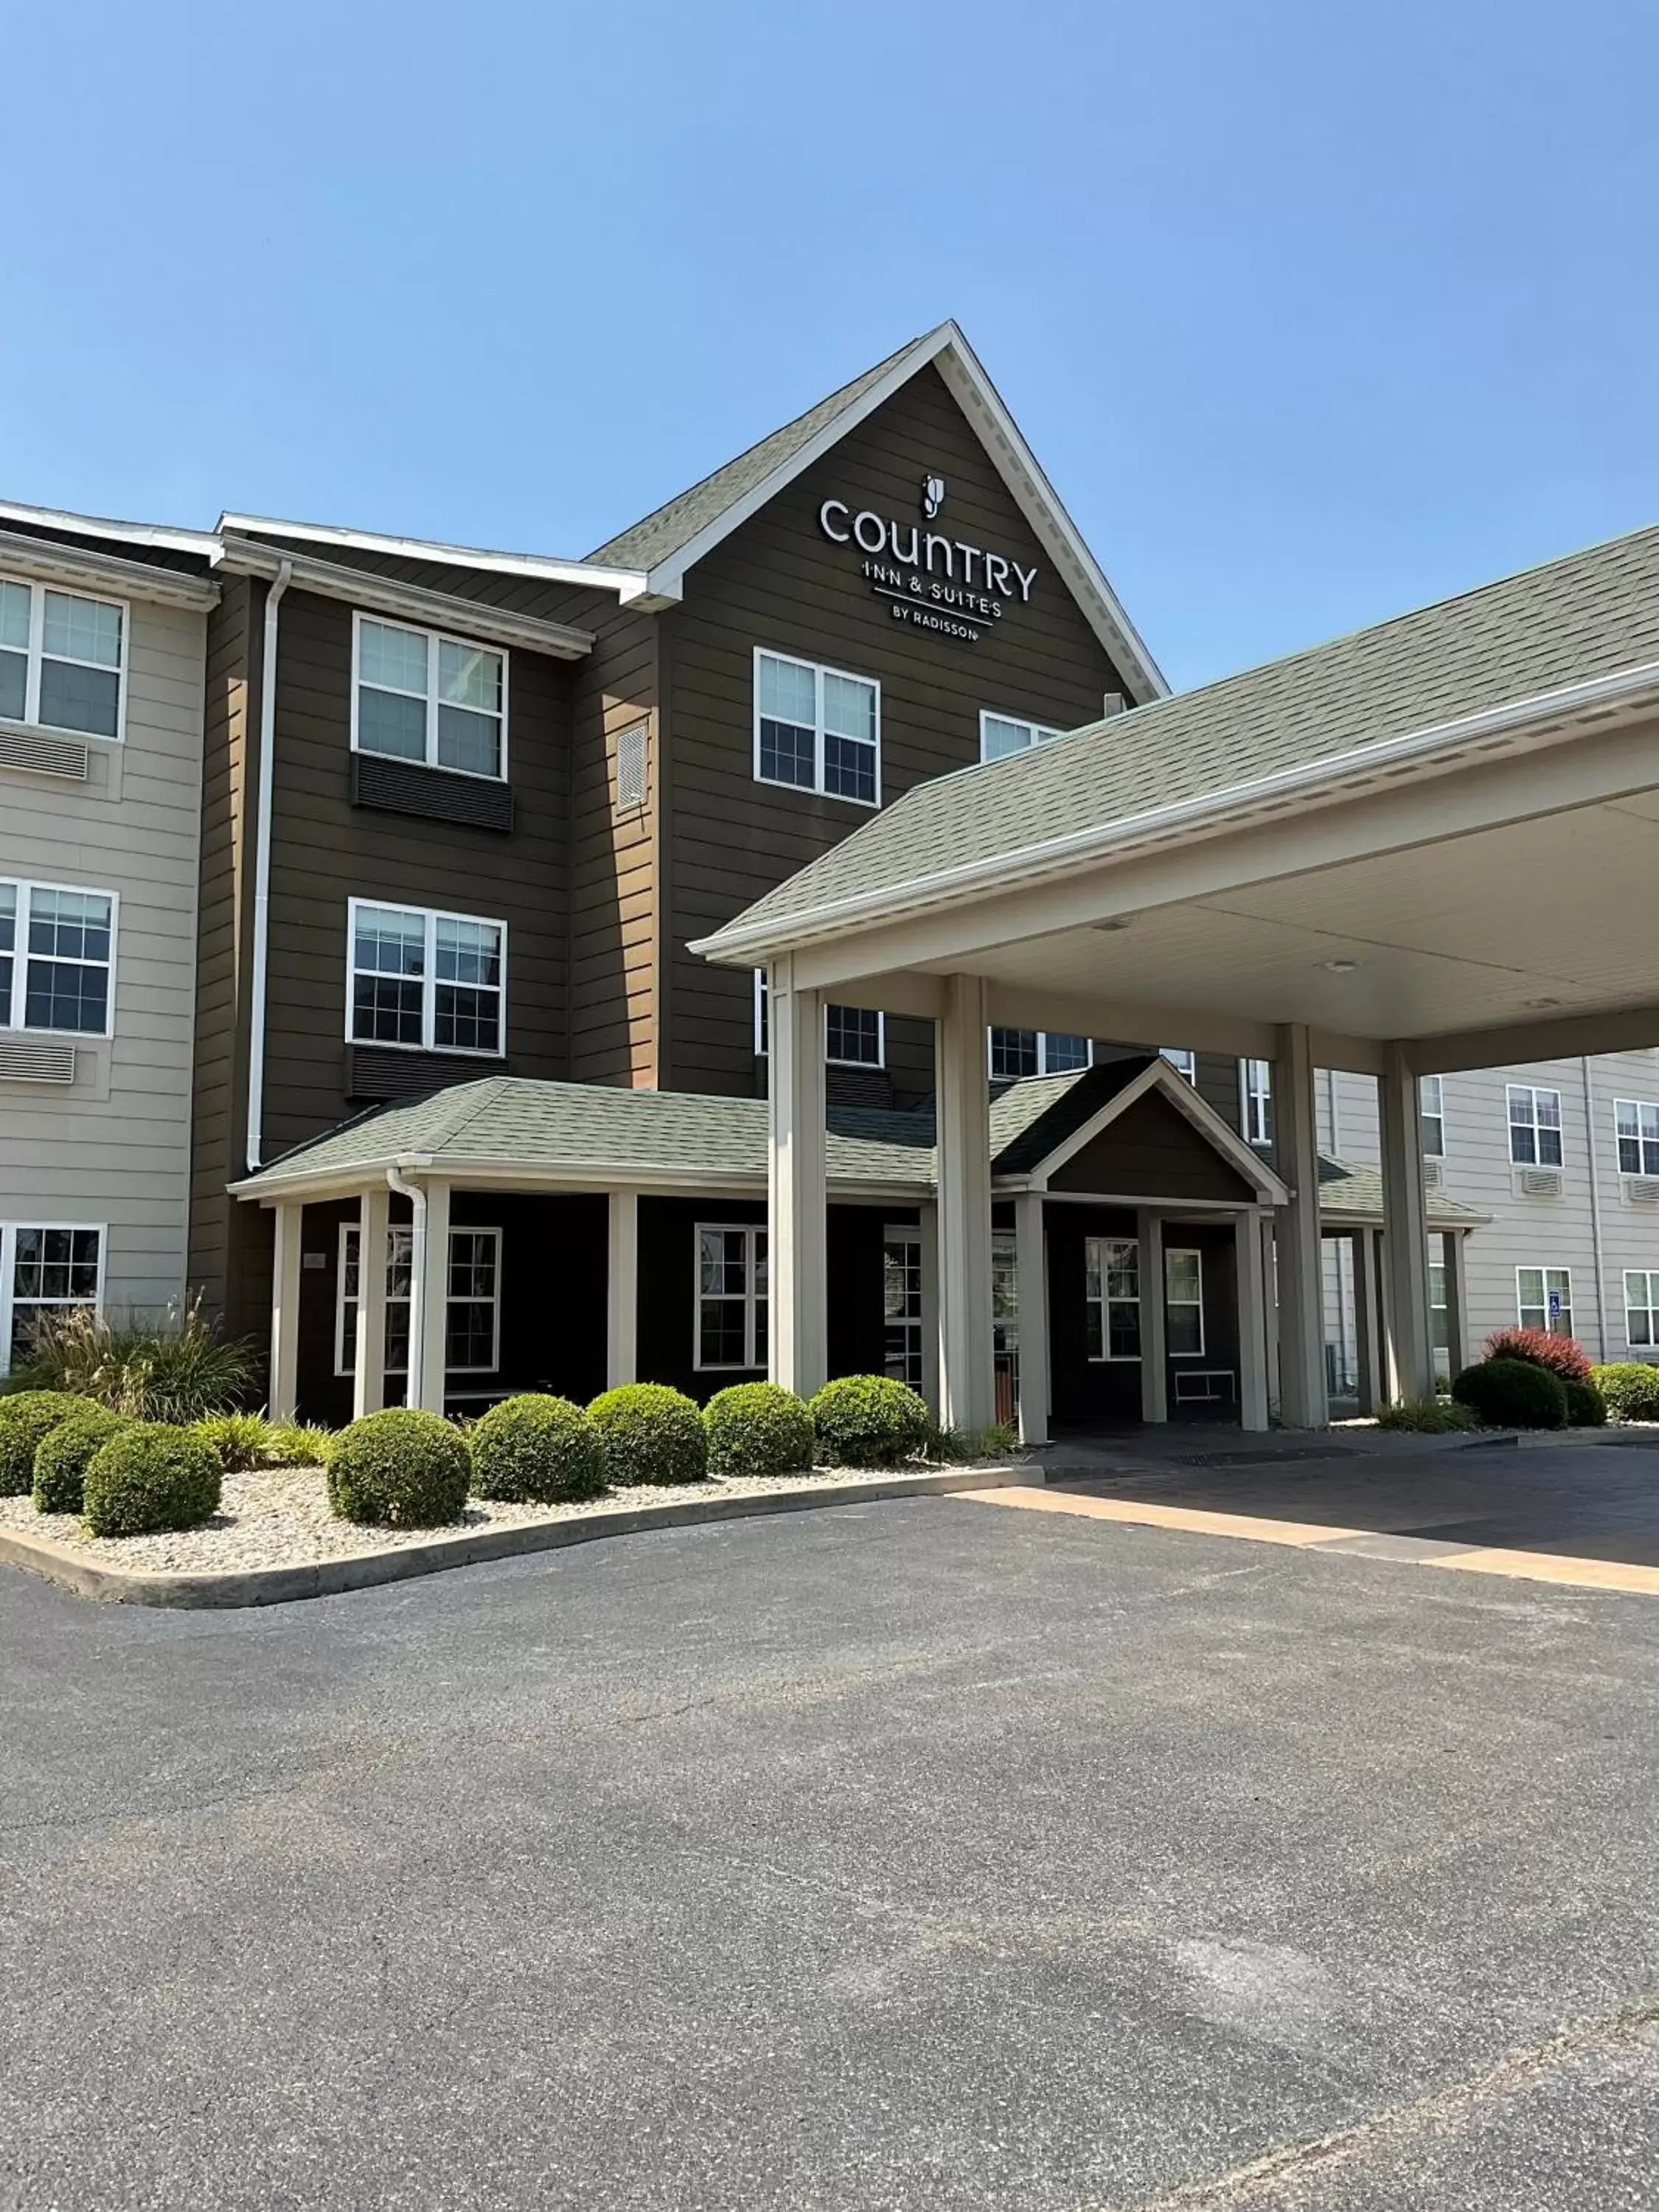 Property Building in Country Inn & Suites by Radisson, Marion, IL